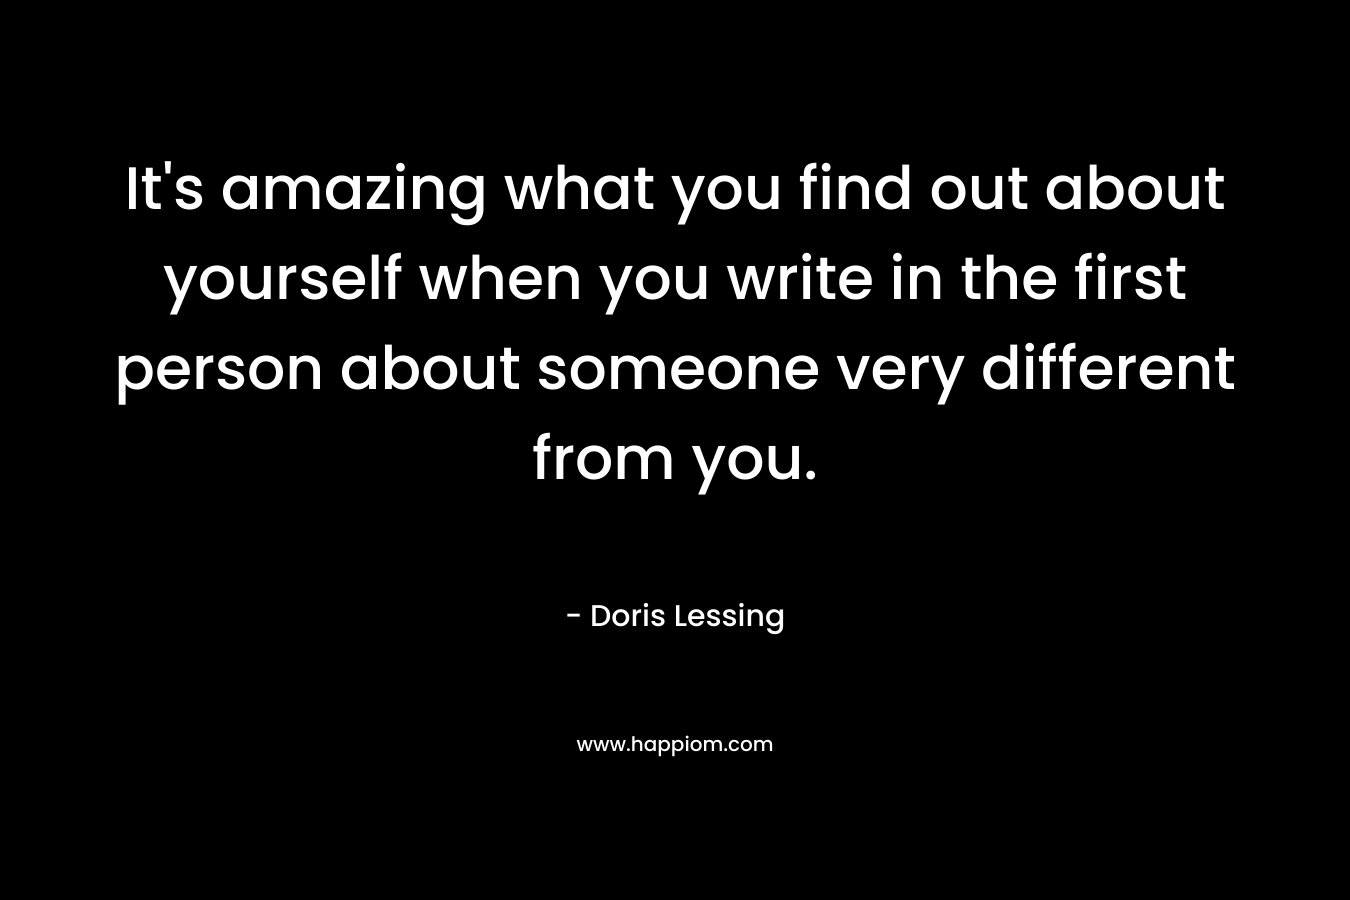 It’s amazing what you find out about yourself when you write in the first person about someone very different from you. – Doris Lessing